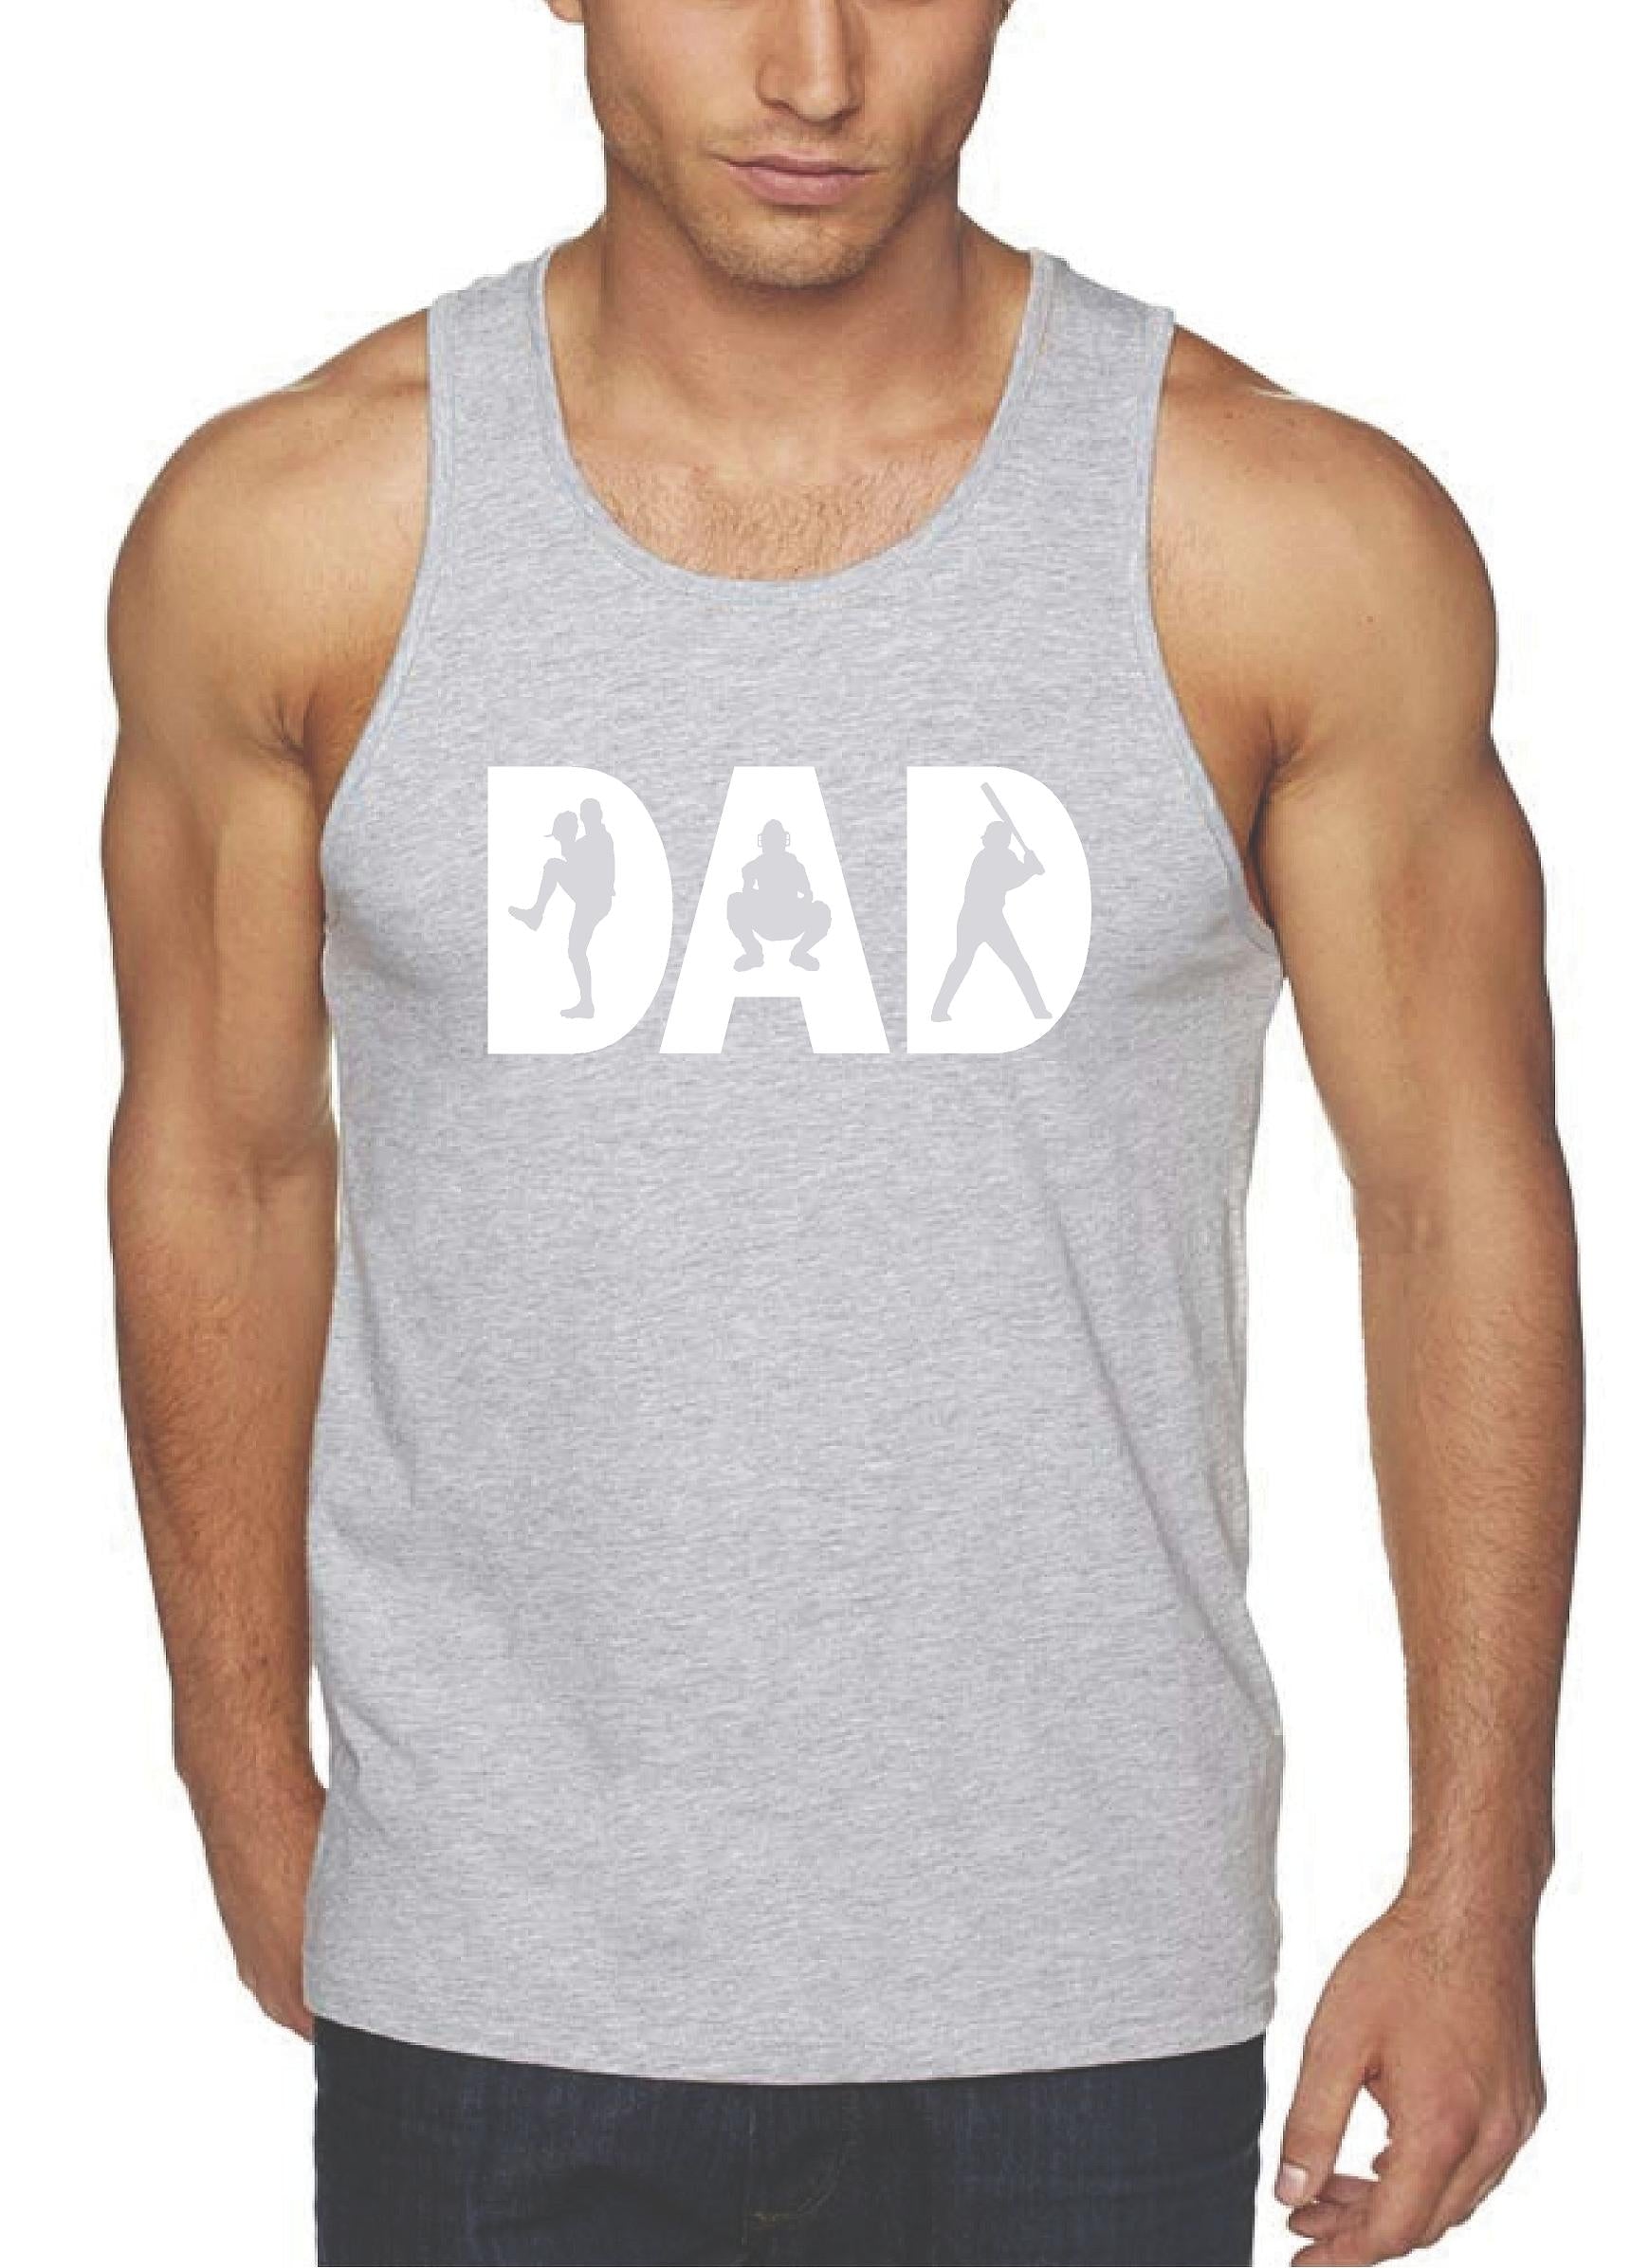 graphic tank tops for men